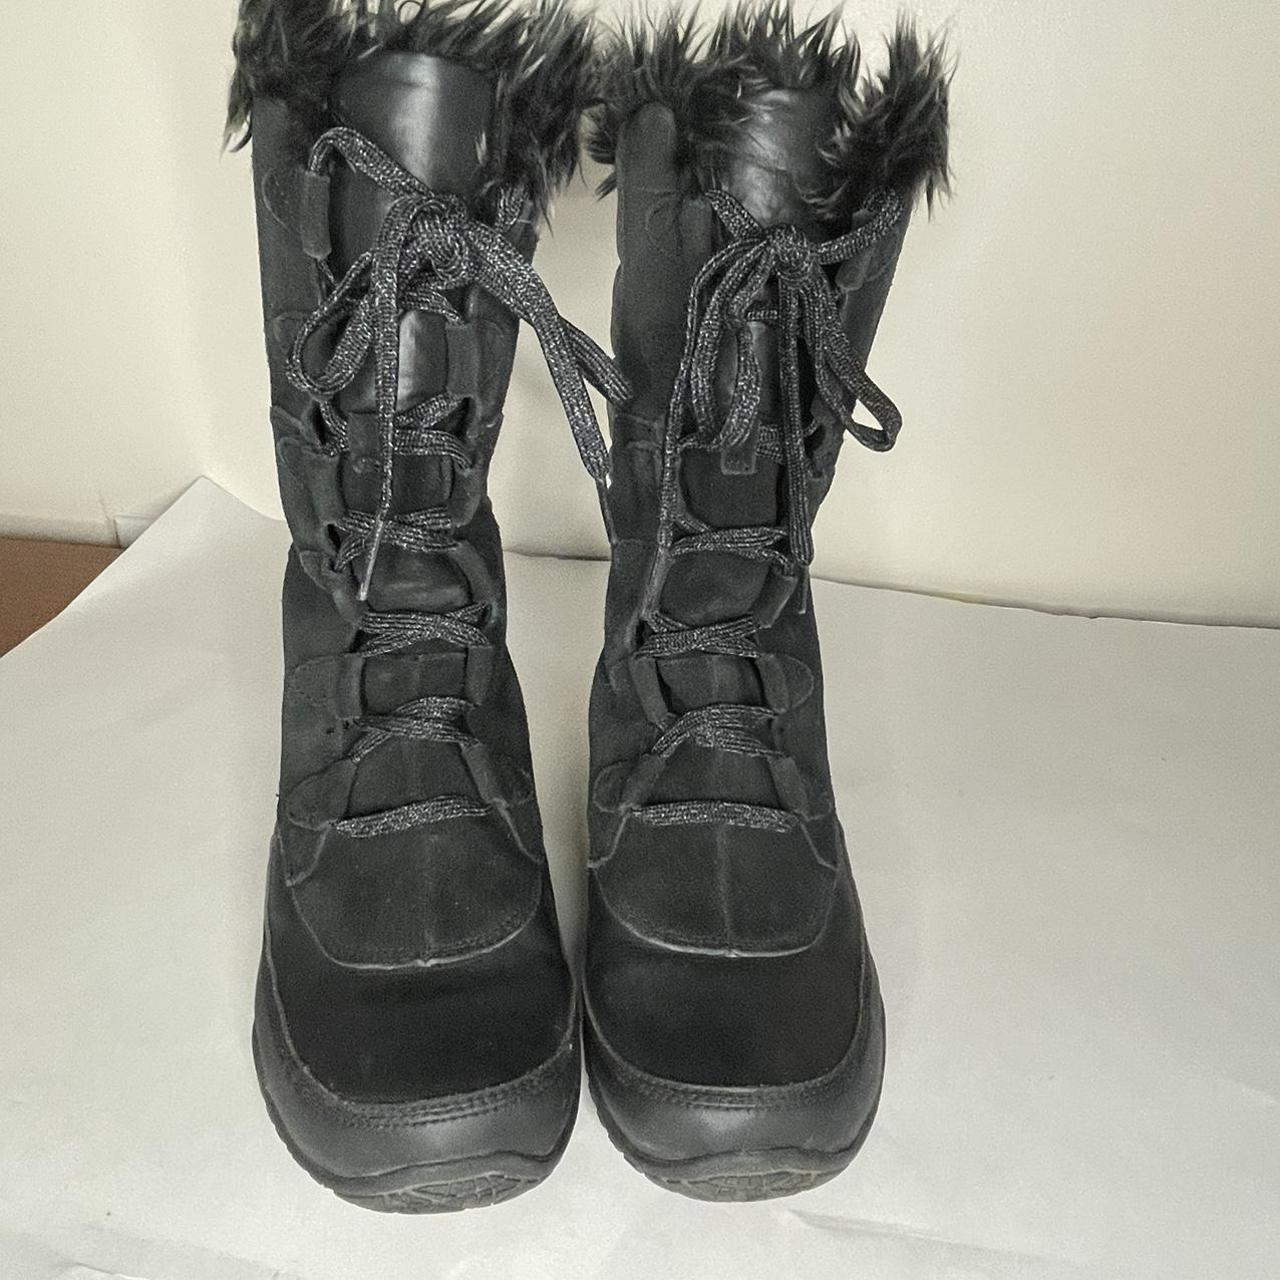 The North Face Women's Black Boots | Depop